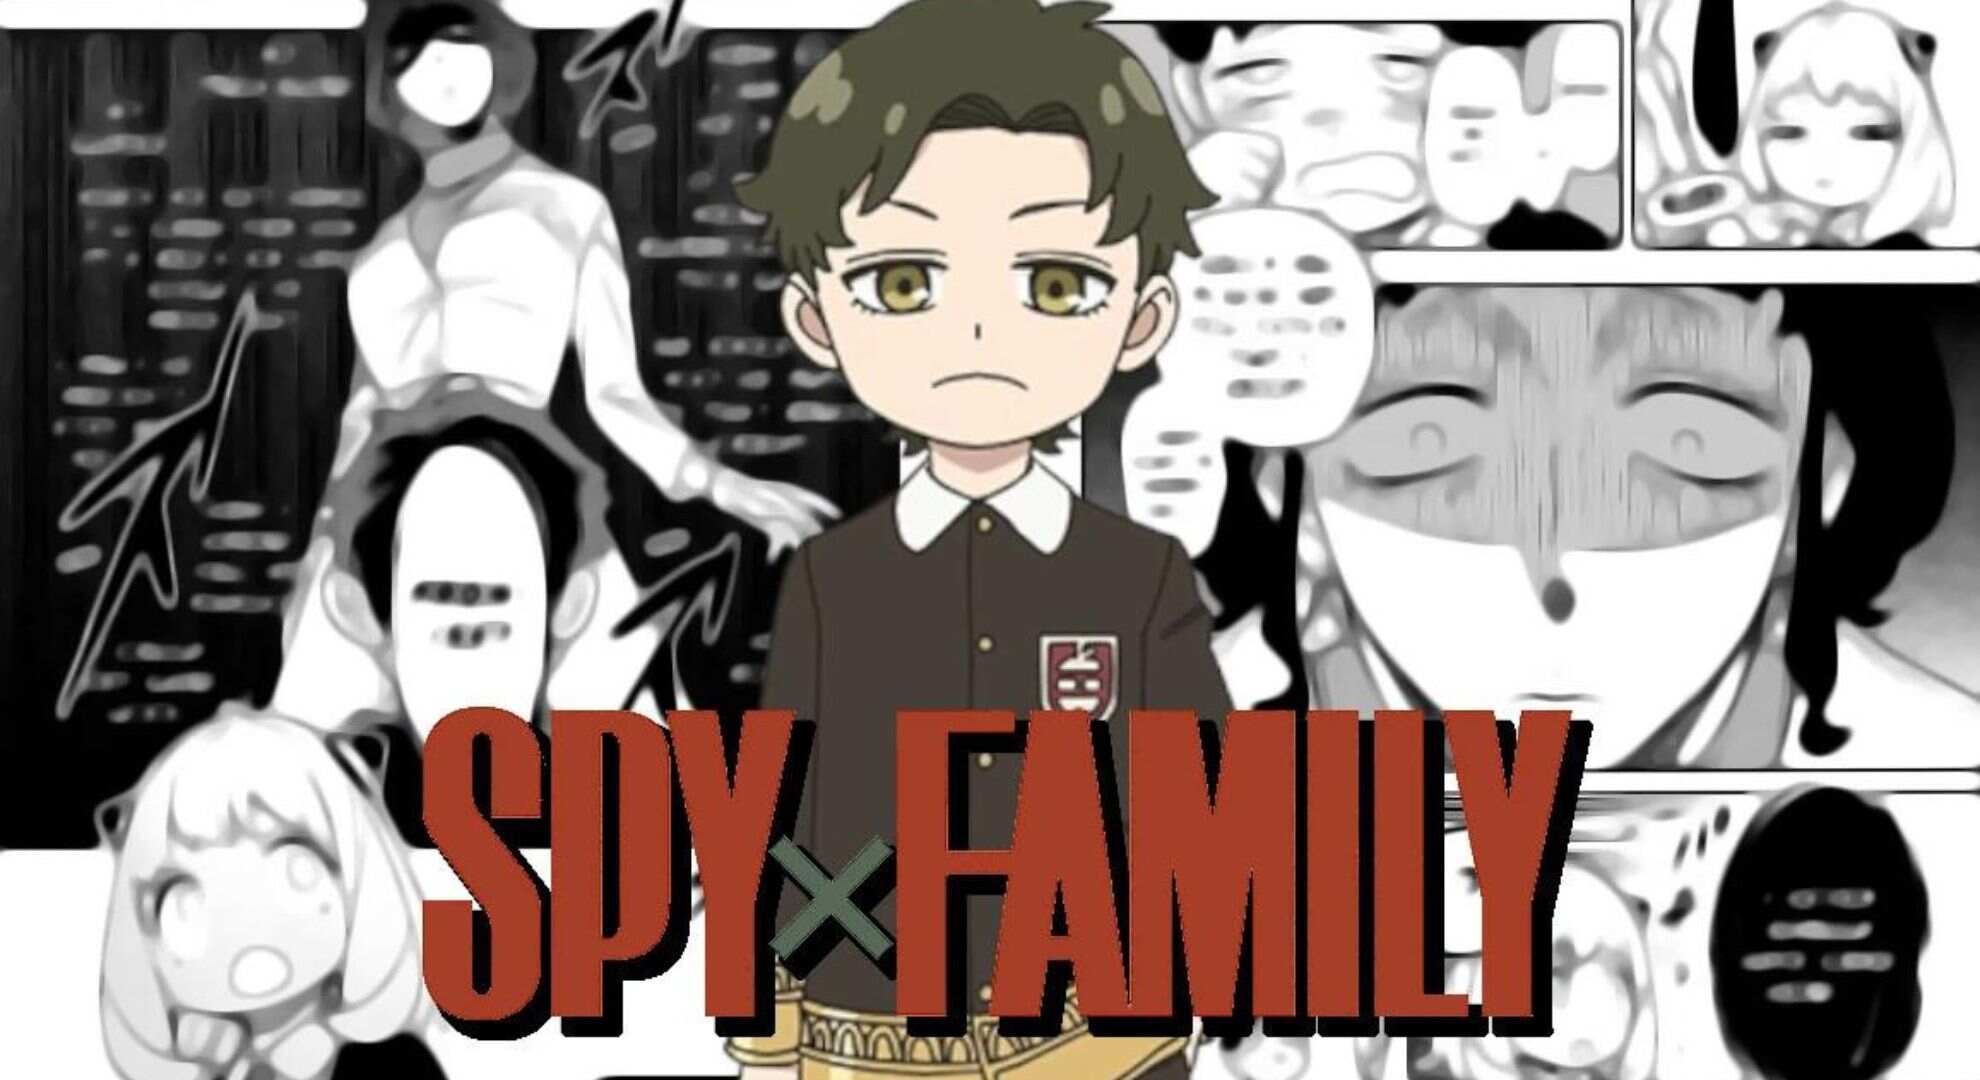 Spy x Family Manga Chapter 76 Spoilers, release date, raw scan and where to  read chapter online? - Sportslumo